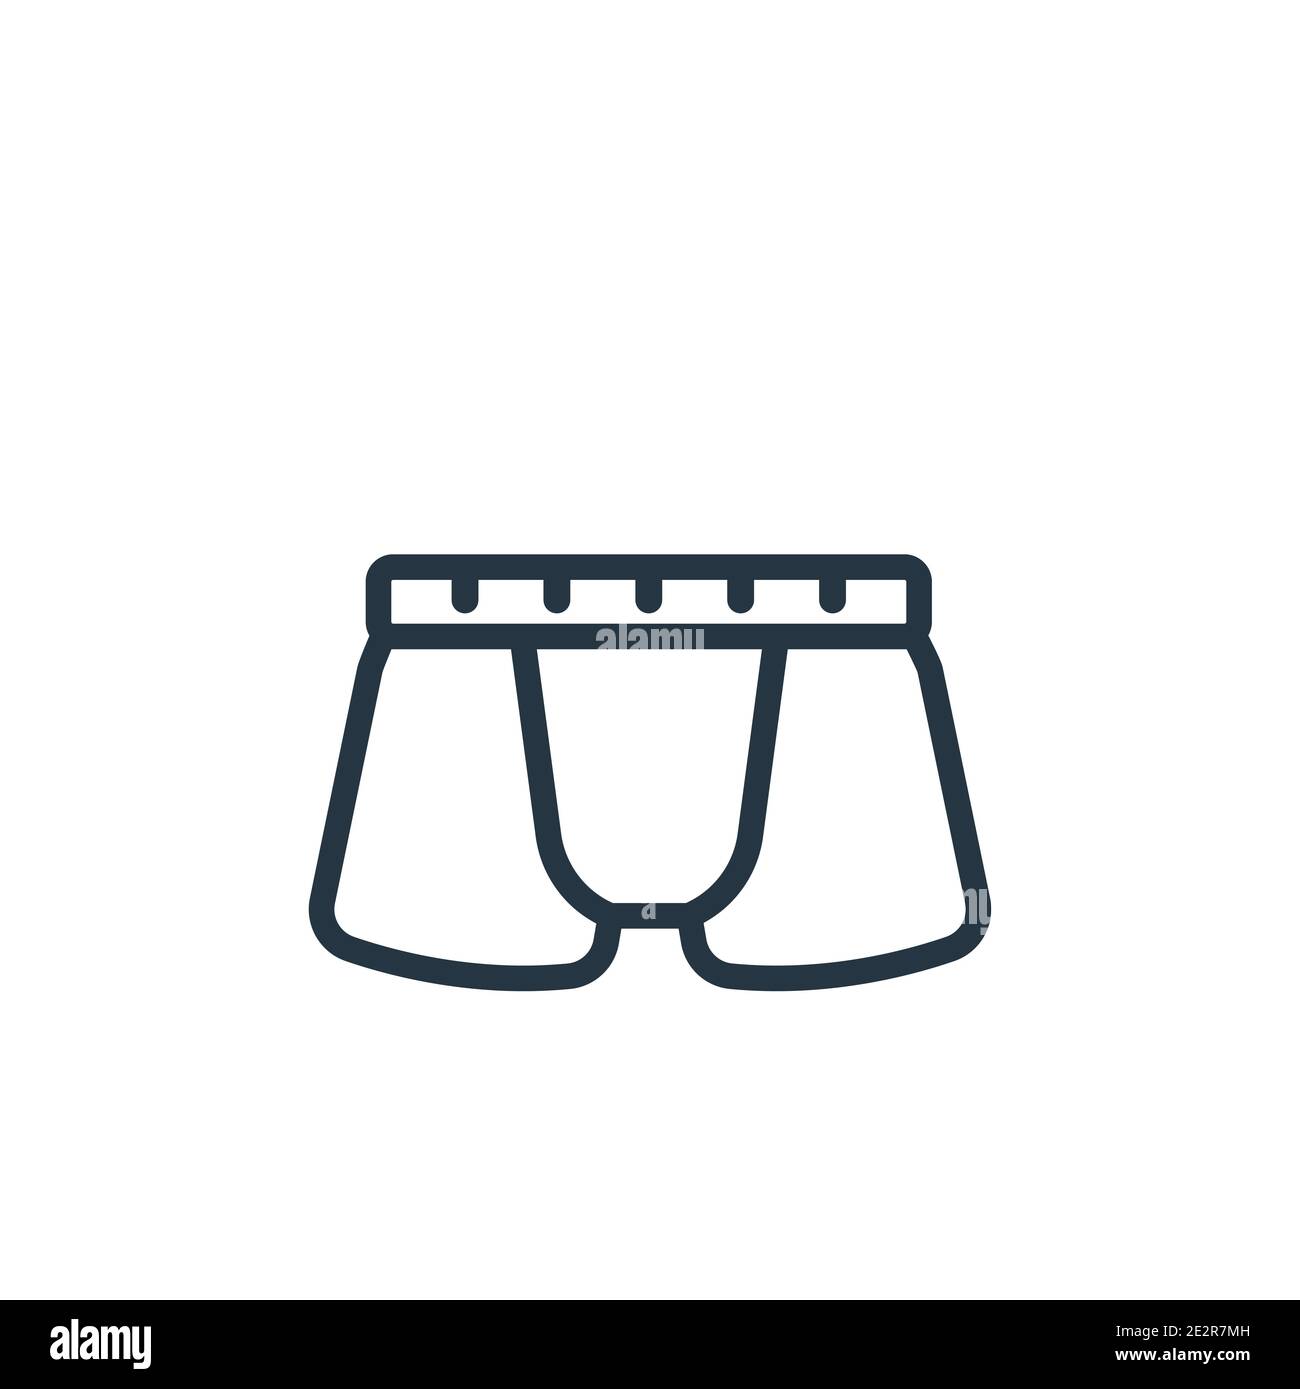 https://c8.alamy.com/comp/2E2R7MH/boxers-outline-vector-icon-thin-line-black-boxers-icon-flat-vector-simple-element-illustration-from-editable-clothes-concept-isolated-stroke-on-whit-2E2R7MH.jpg